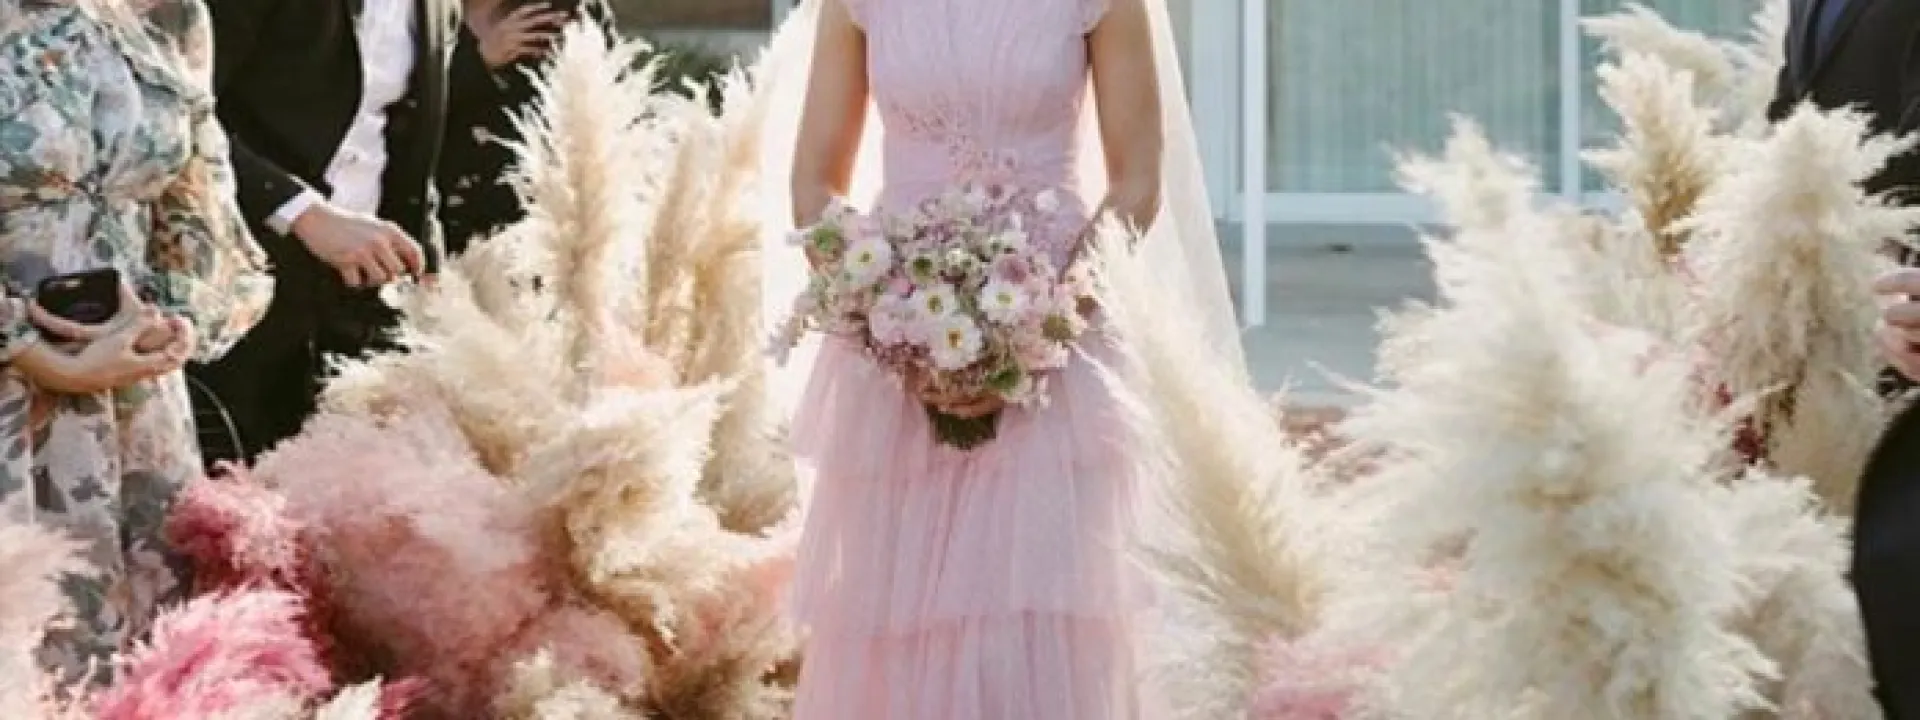 To get Mandy Moore's wedding look, designer Azazie features a similar dress at half the price. 